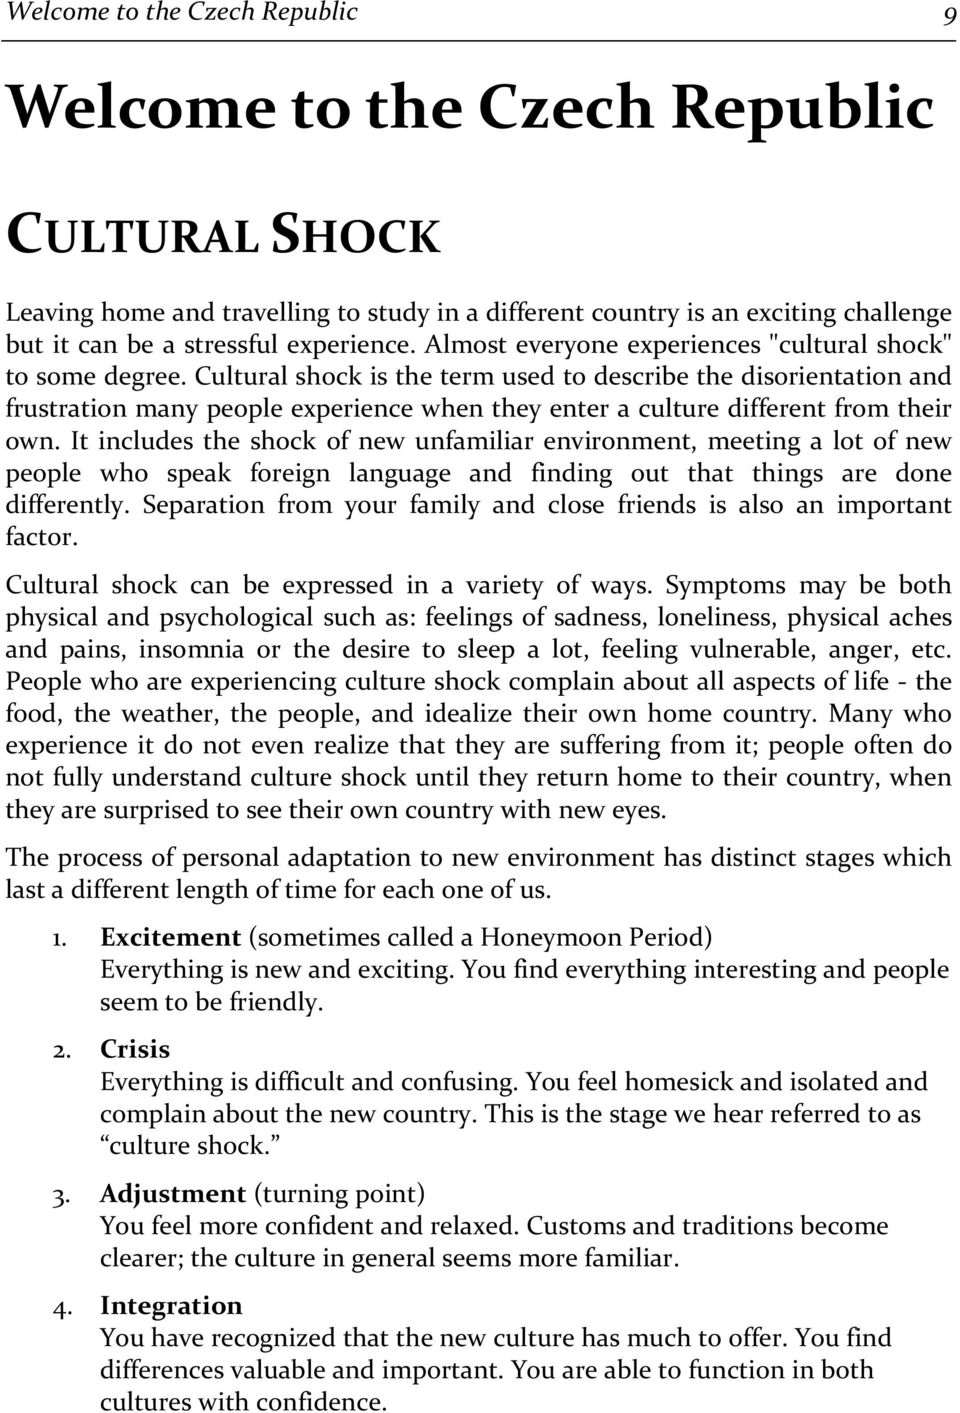 Cultural shock is the term used to describe the disorientation and frustration many people experience when they enter a culture different from their own.